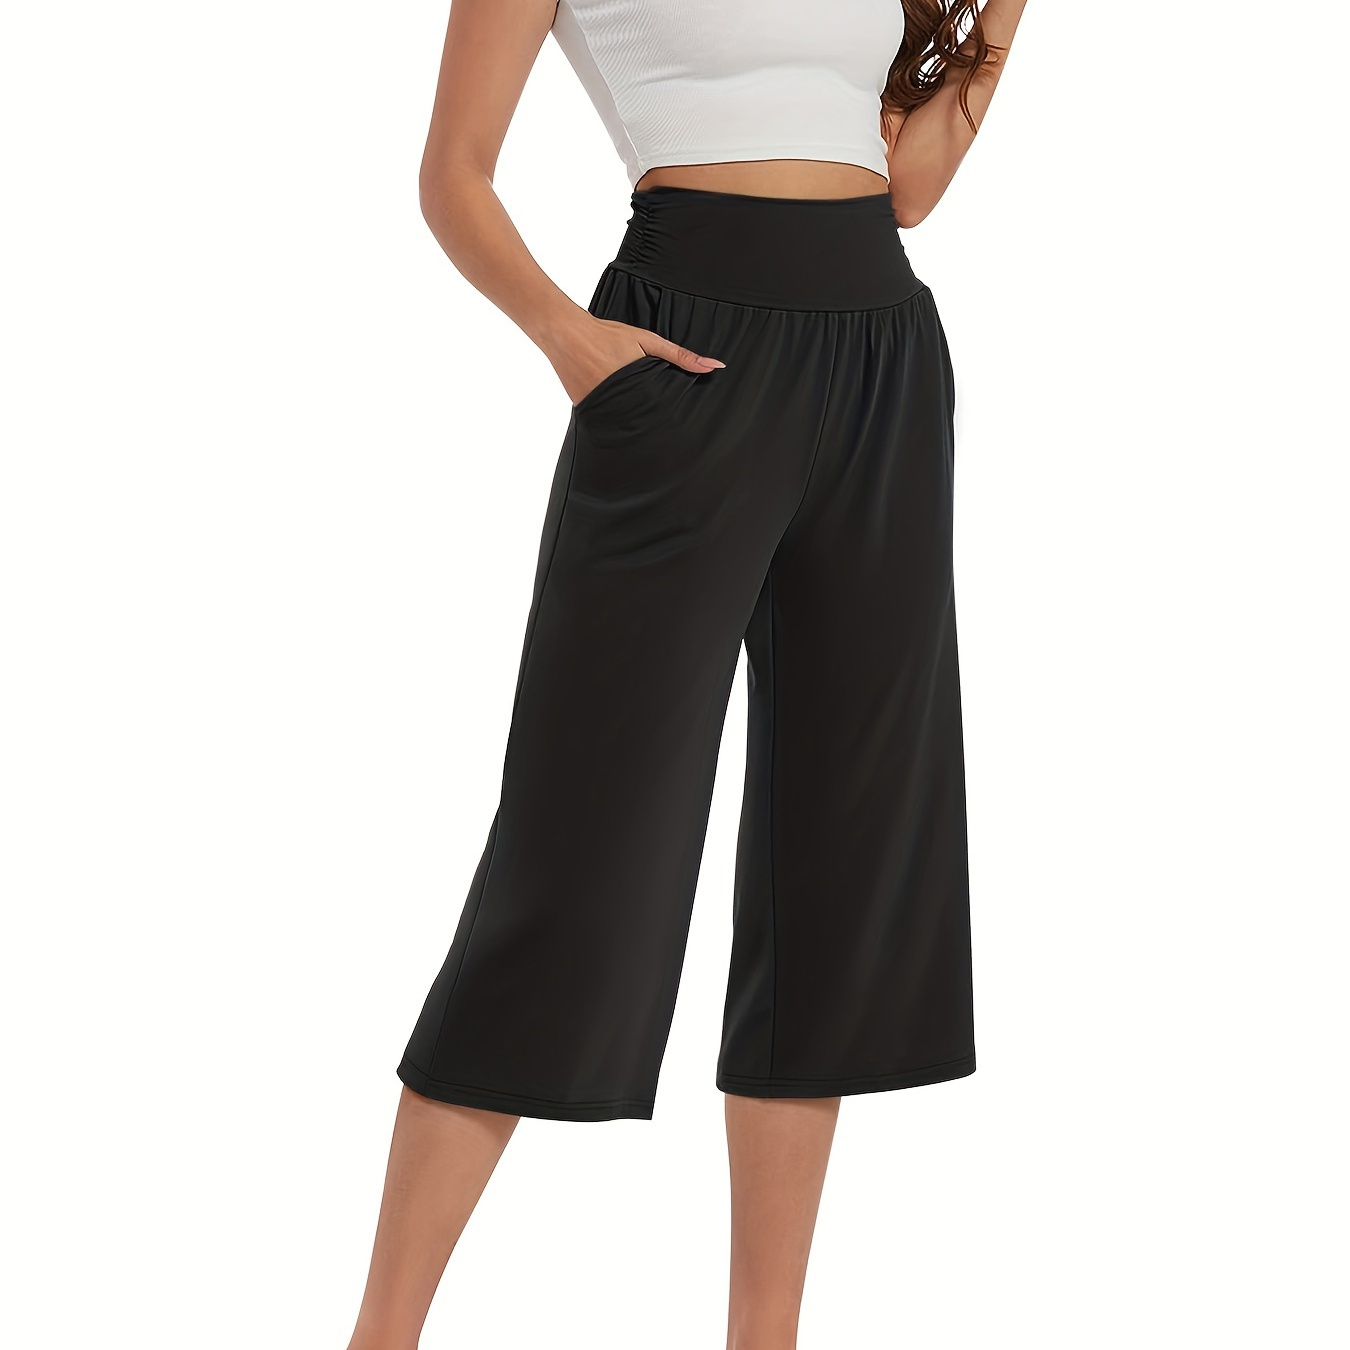 

Women's Fashion Casual Sporty Capri Pants, Trendy Mid-calf Length, Casual Elastic Waistband, Comfort Fit, Versatile Solid Black, Breathable Summer Wear